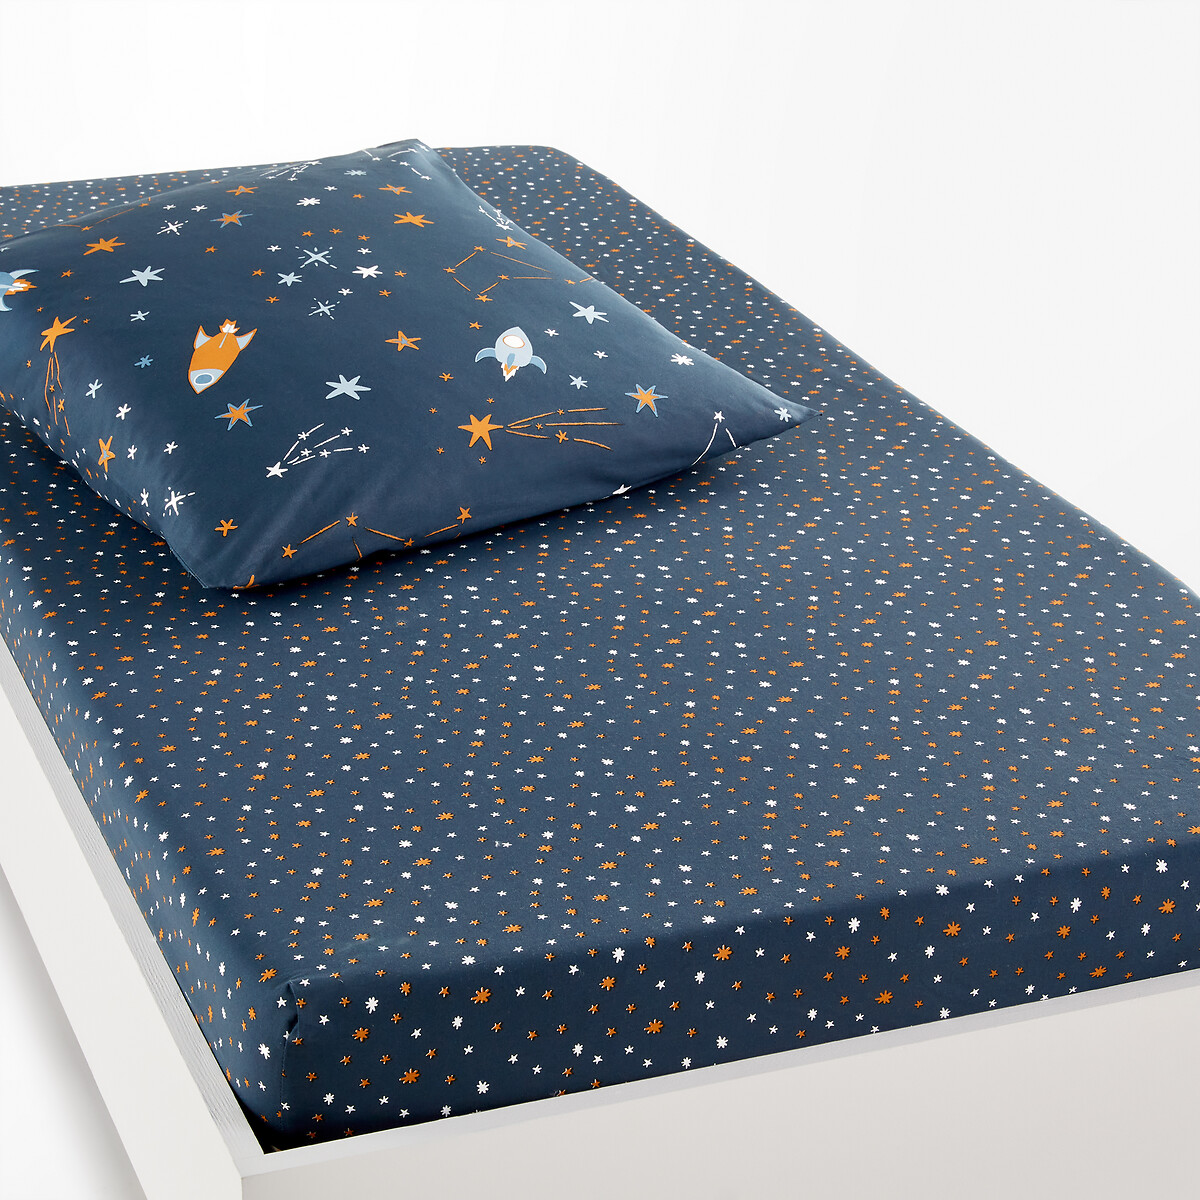 Gaston Space 100% Cotton Fitted Sheet